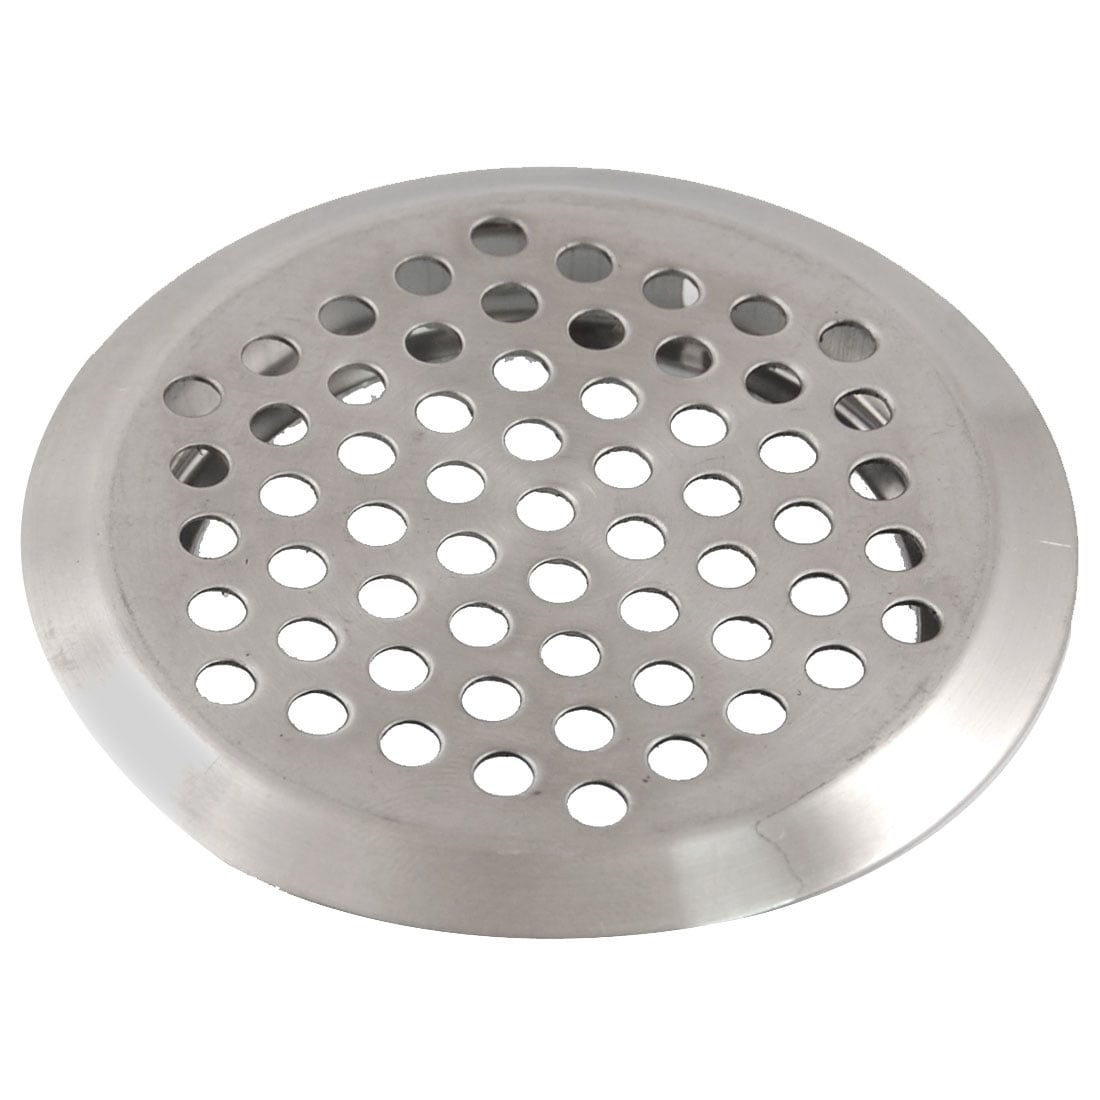 53mm x 65mm Silver Tone Perforated Round Mesh Air Vent New - Silver Tone - Stainless Steel